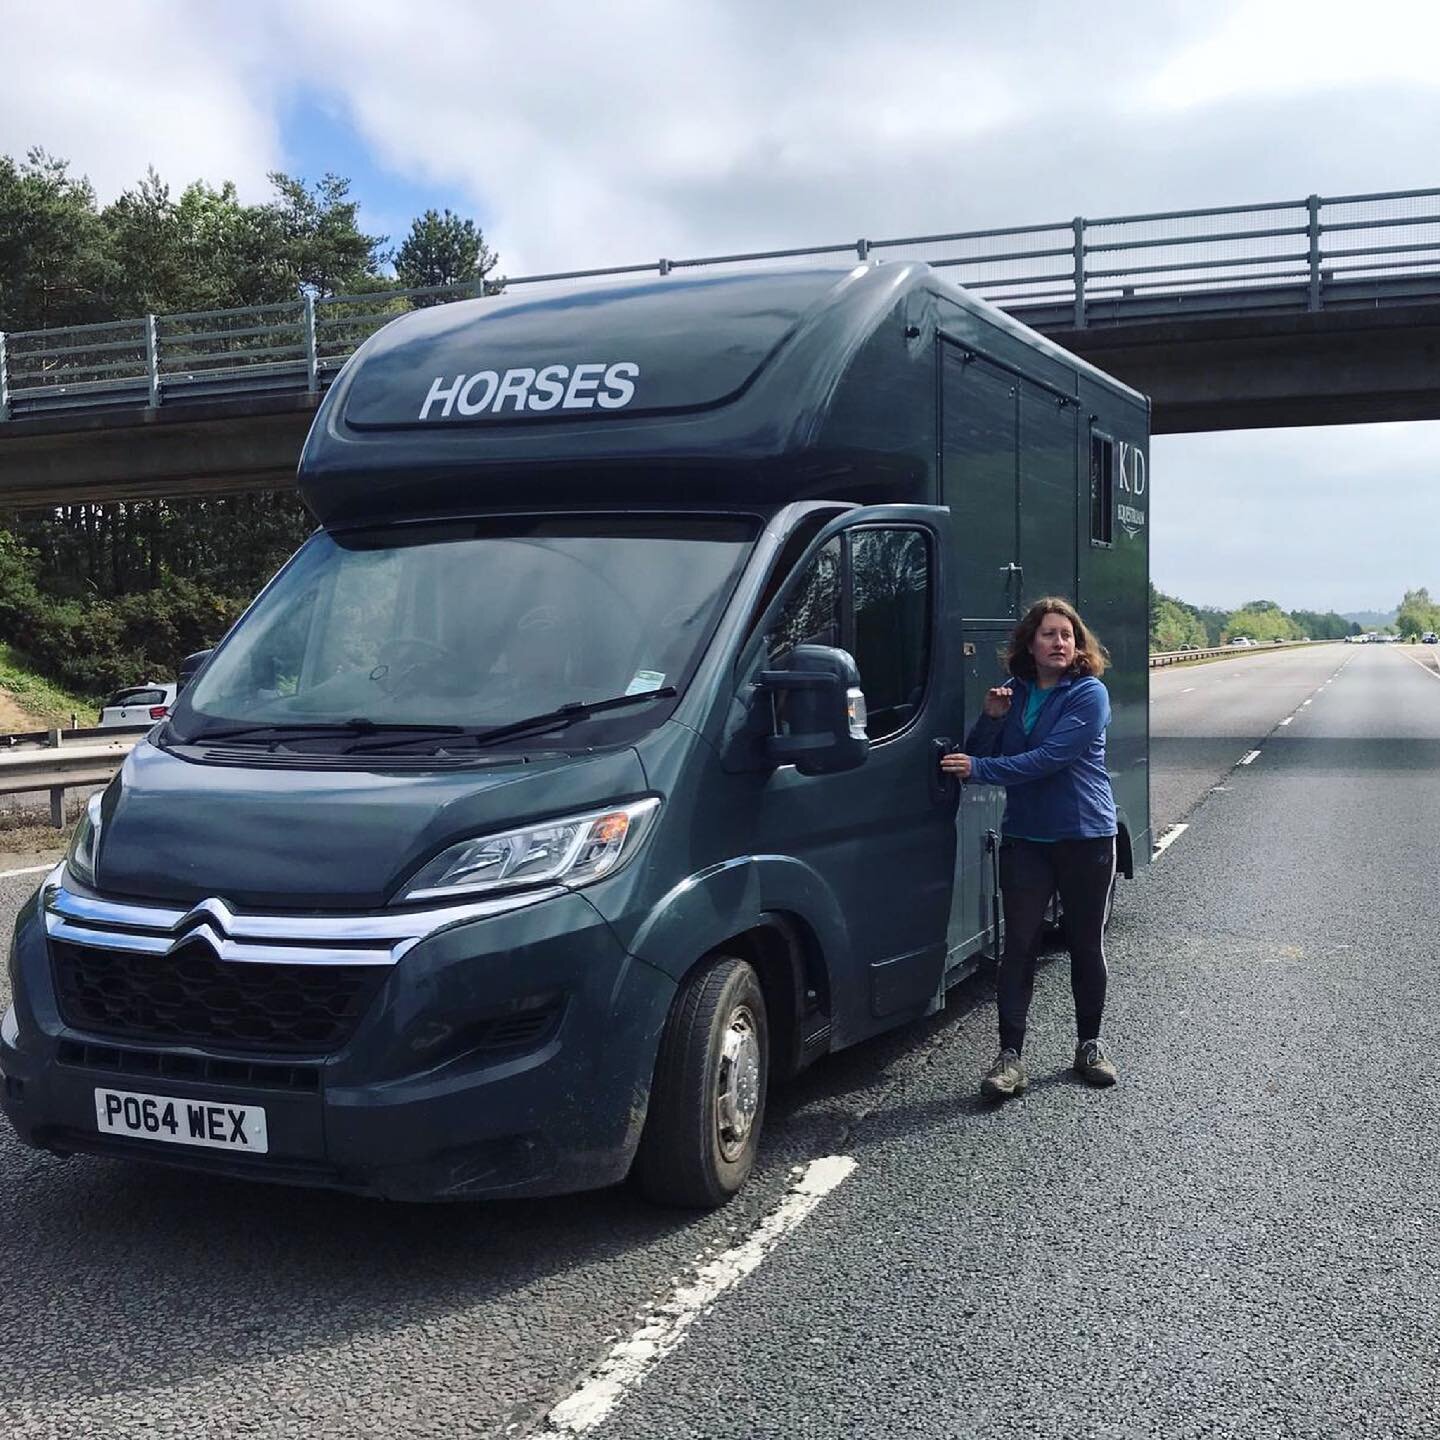 Well done to @ems_barton for rescuing horses from a broken down trailer on the A3 earlier this week. Little Lorry to the rescue!! 🤗